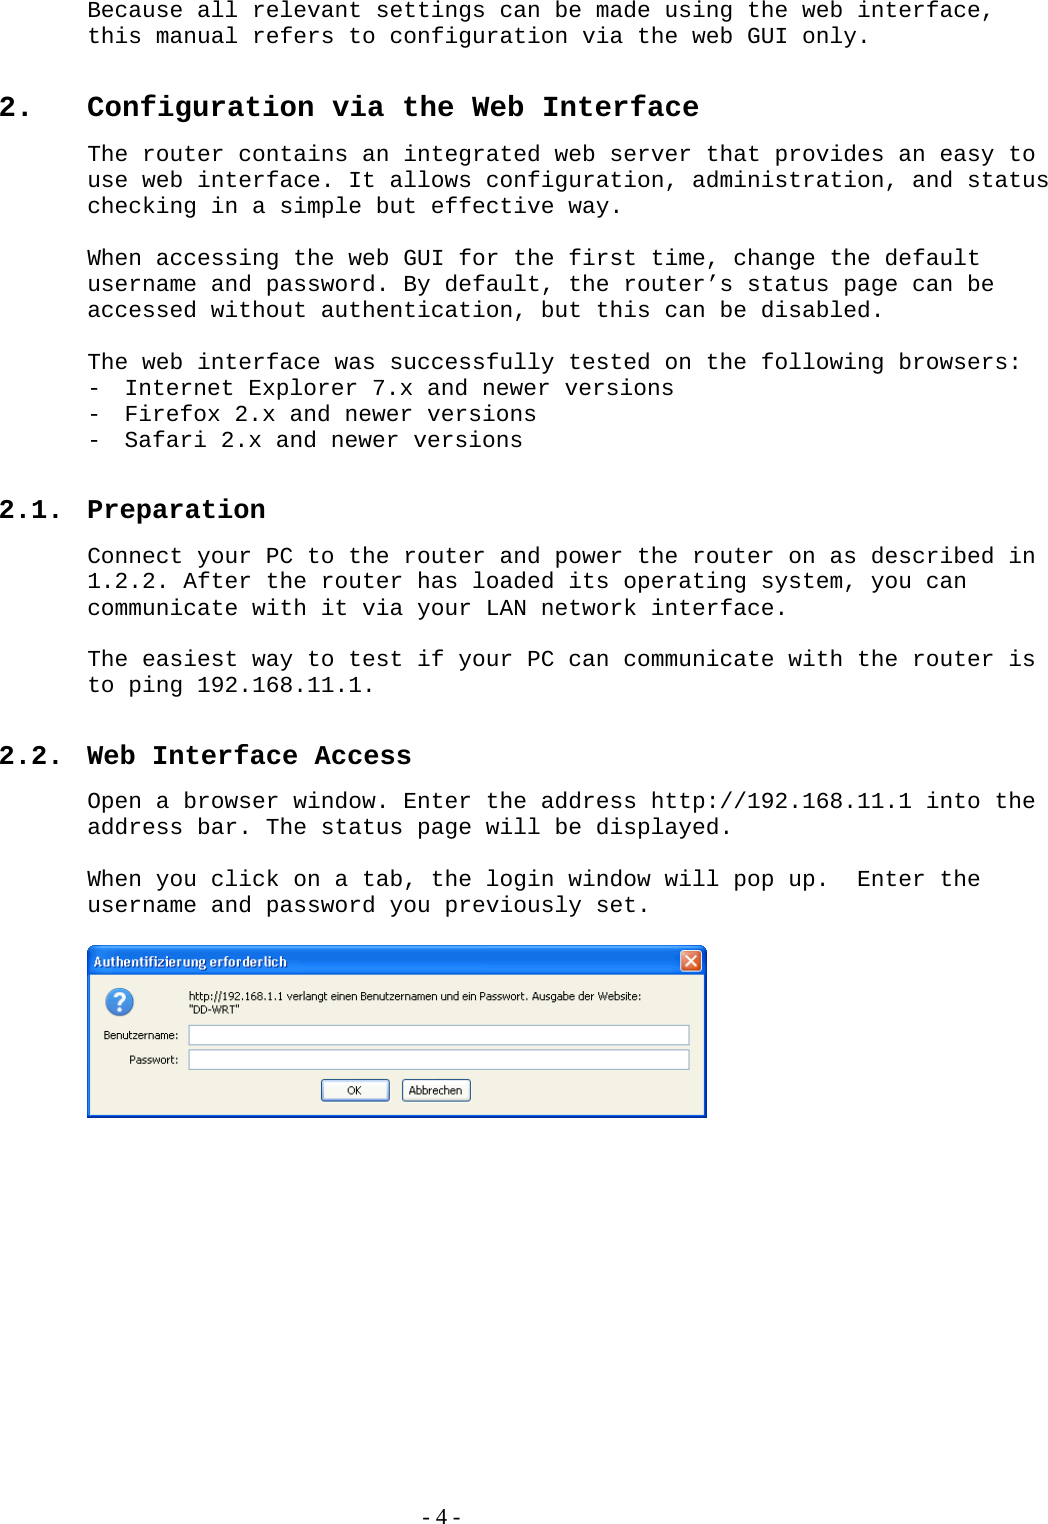 Because all relevant settings can be made using the web interface, this manual refers to configuration via the web GUI only.   2.  Configuration via the Web Interface The router contains an integrated web server that provides an easy to use web interface. It allows configuration, administration, and status checking in a simple but effective way.  When accessing the web GUI for the first time, change the default username and password. By default, the router’s status page can be accessed without authentication, but this can be disabled.  The web interface was successfully tested on the following browsers: - Internet Explorer 7.x and newer versions - Firefox 2.x and newer versions - Safari 2.x and newer versions  2.1. Preparation Connect your PC to the router and power the router on as described in 1.2.2. After the router has loaded its operating system, you can communicate with it via your LAN network interface.   The easiest way to test if your PC can communicate with the router is to ping 192.168.11.1.   2.2.  Web Interface Access Open a browser window. Enter the address http://192.168.11.1 into the address bar. The status page will be displayed.   When you click on a tab, the login window will pop up.  Enter the username and password you previously set.      - 4 - 